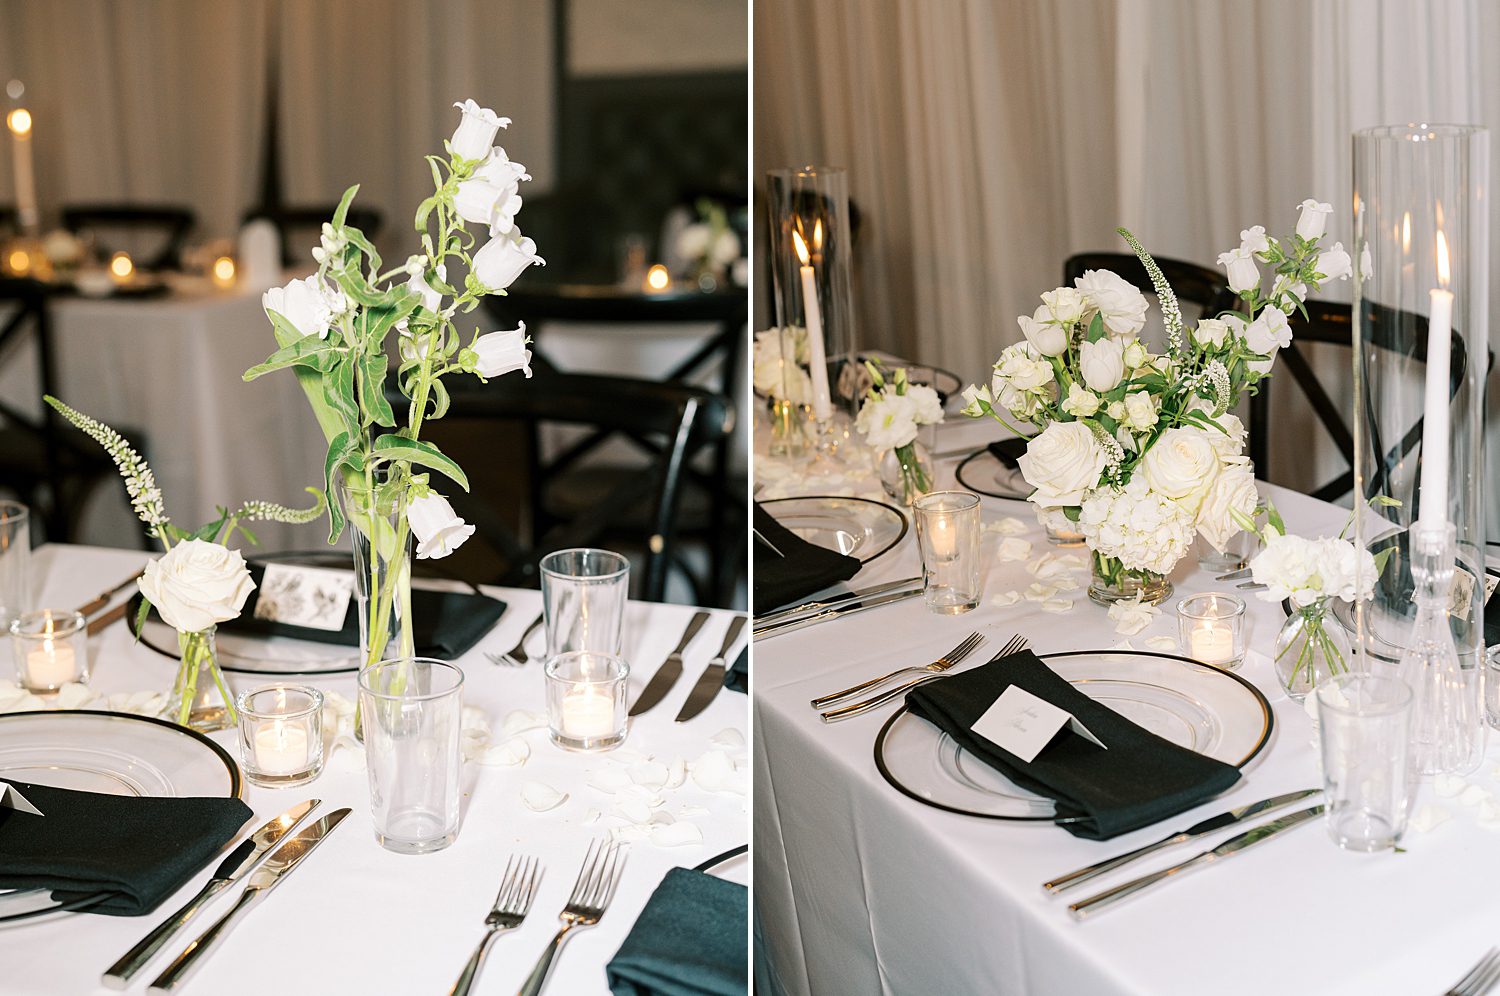 black and white place setting for elegant reception at the Oxford Exchange